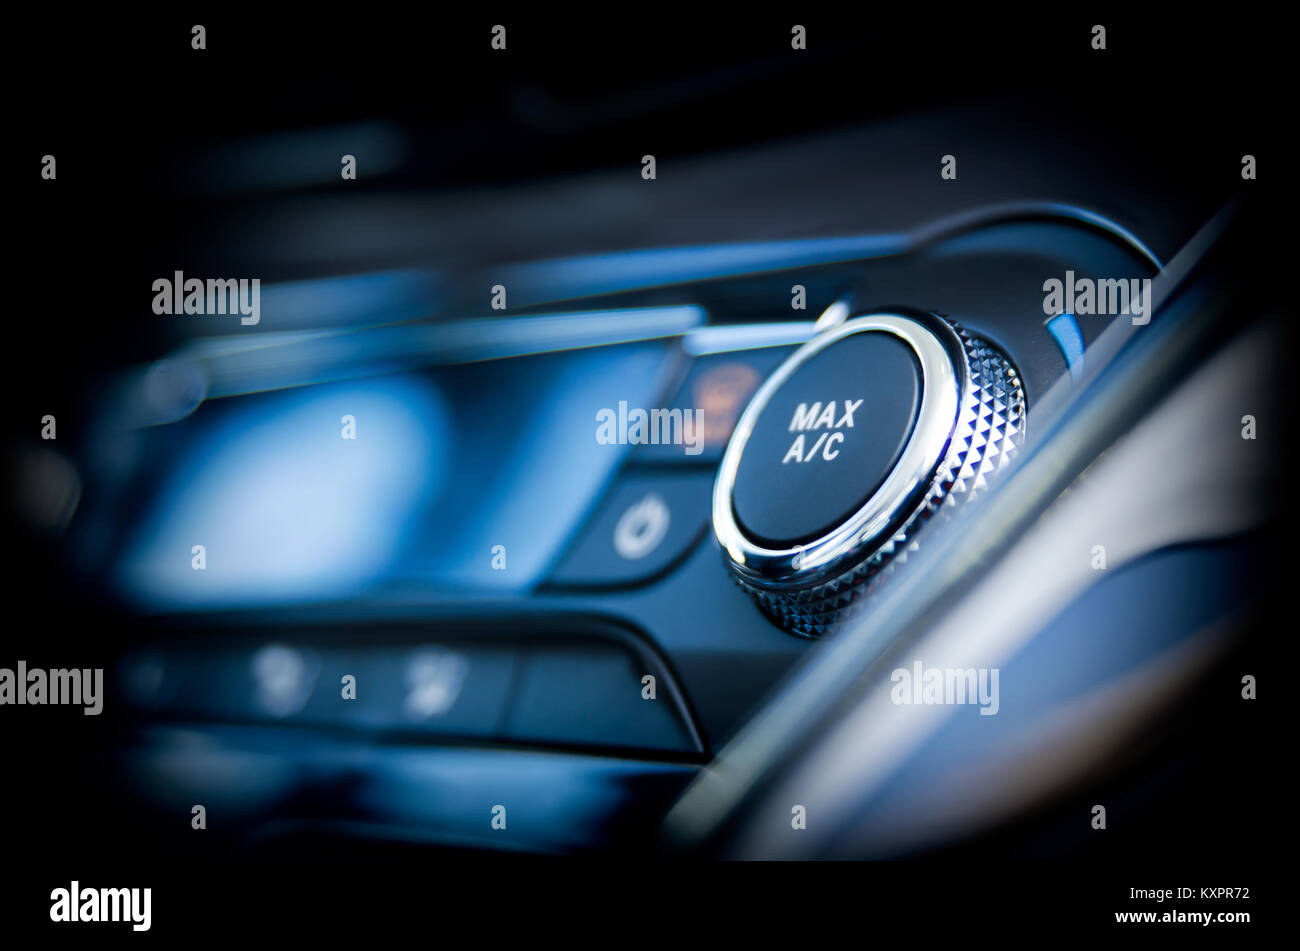 Air conditioning button inside a car. Cold, heat control concept Stock Photo